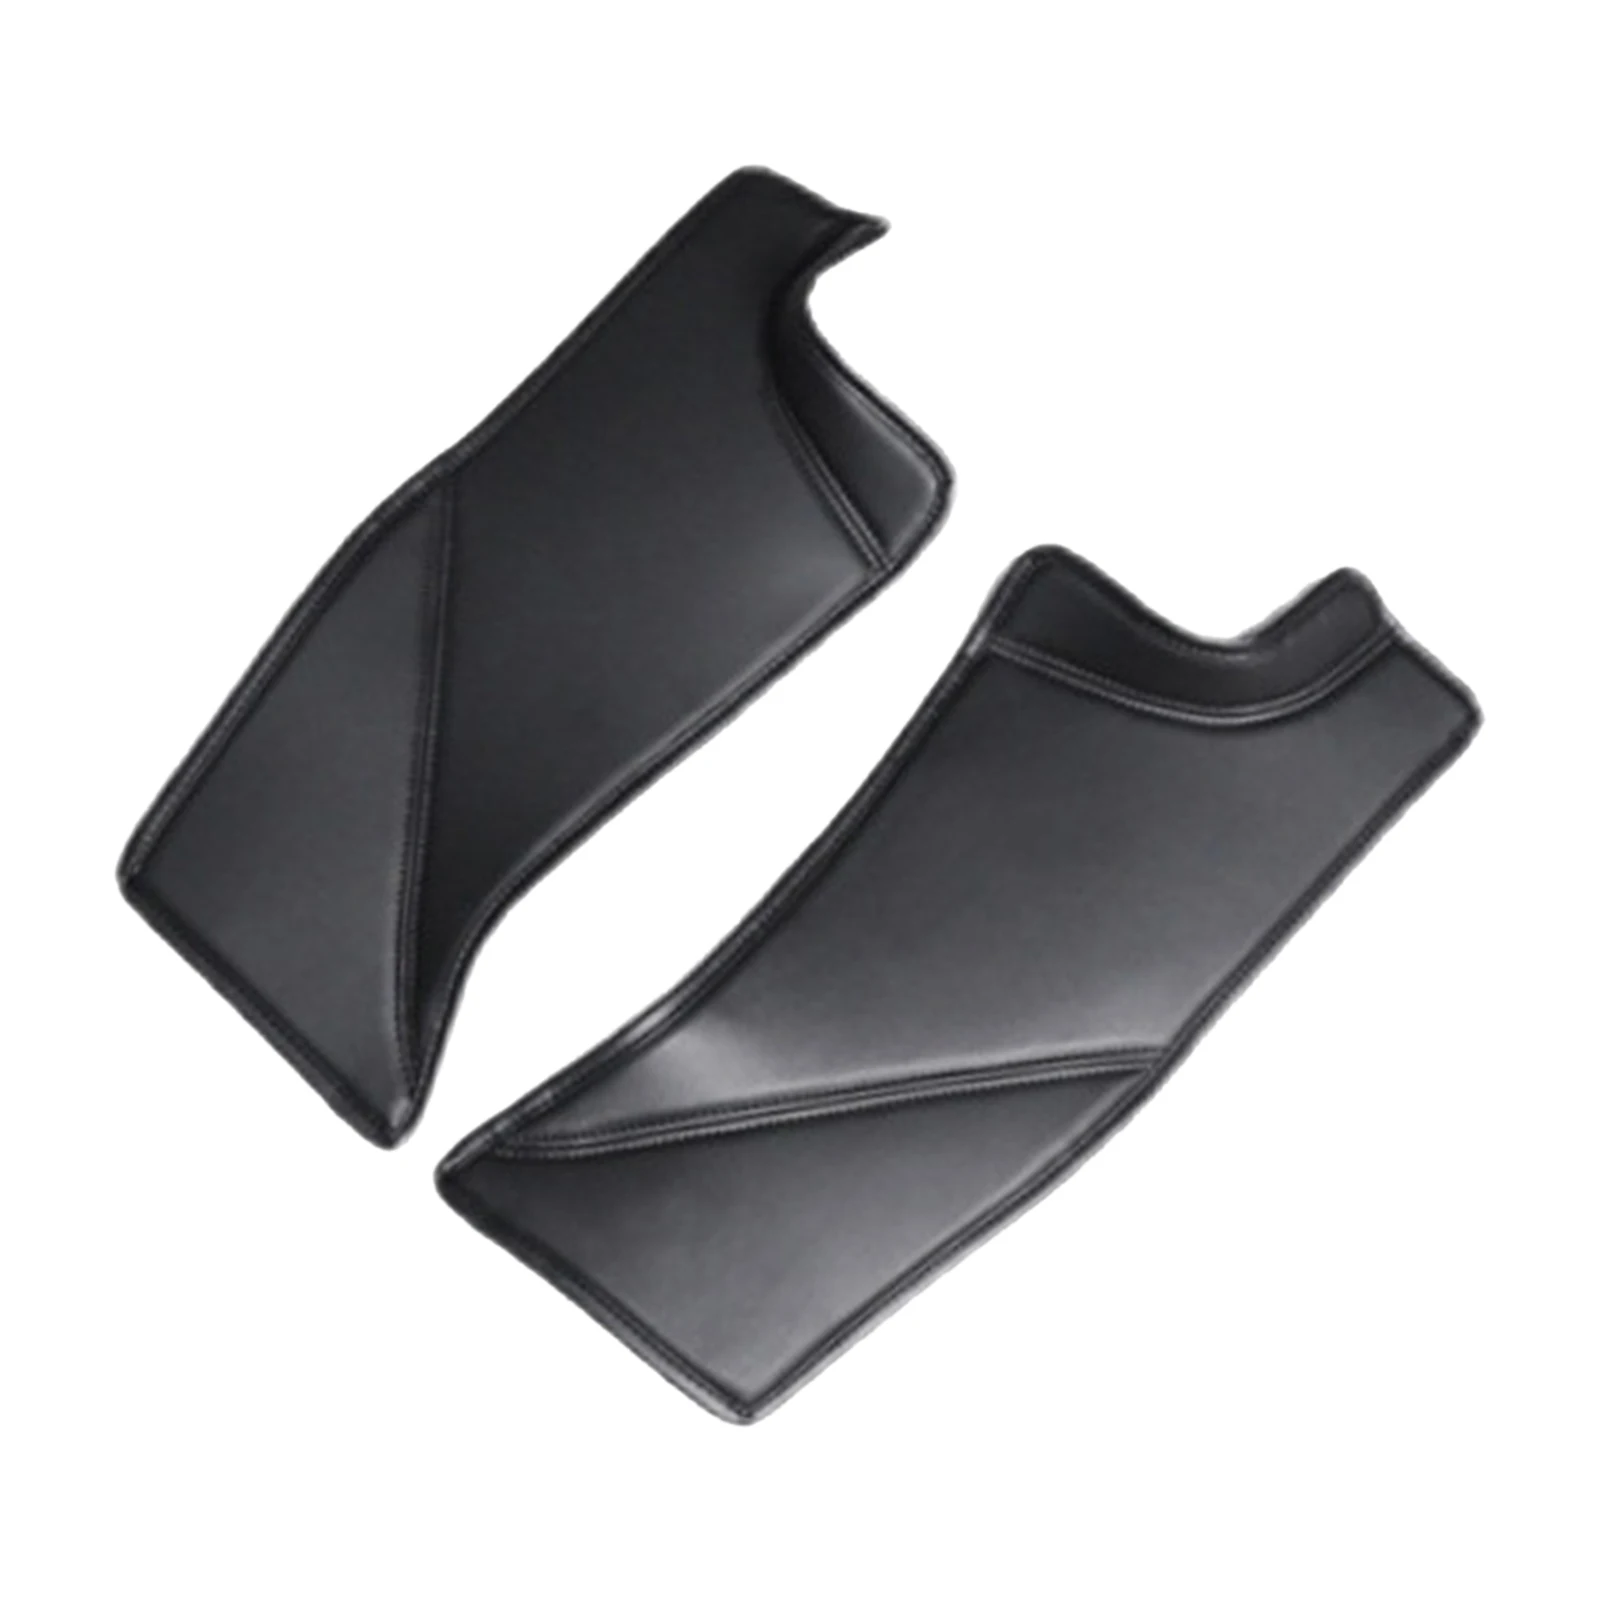 2Pcs Car PU Leather Rear Door Sill  Cover Anti   for ,  install,the back -shaped 